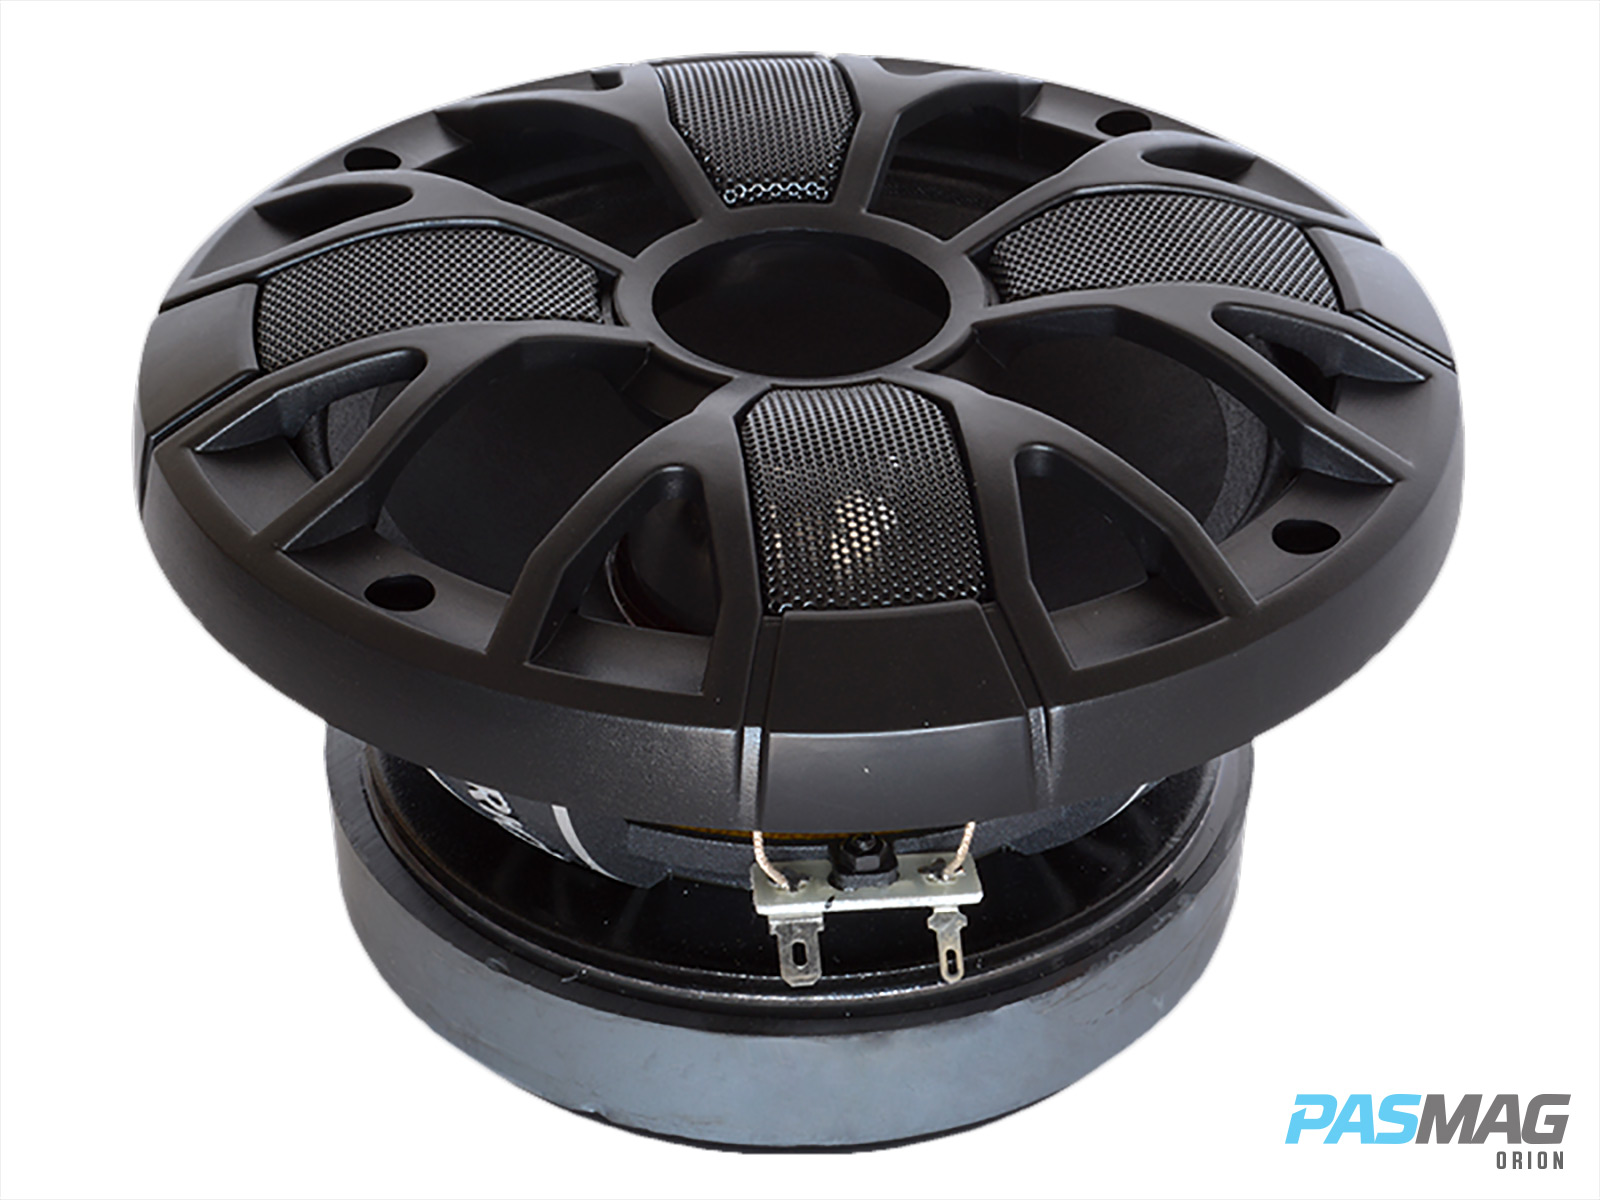 Orion XPM 64MBF Mid Bass Speaker 1 PASMAG